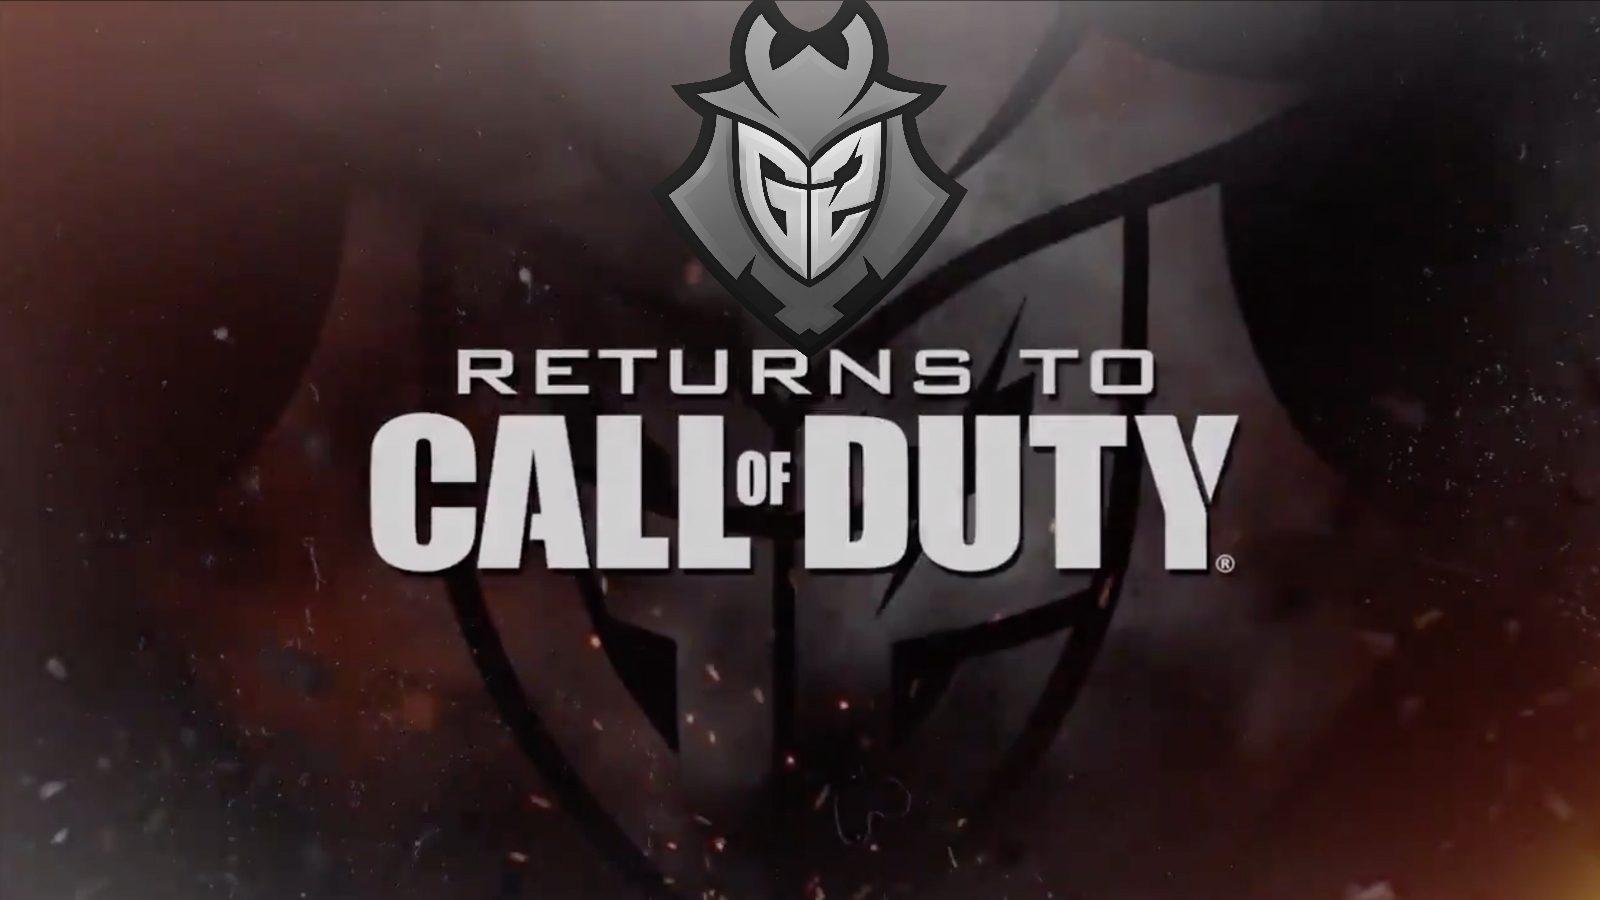 G2 Esports announce return to Call of Duty for Black Ops 4